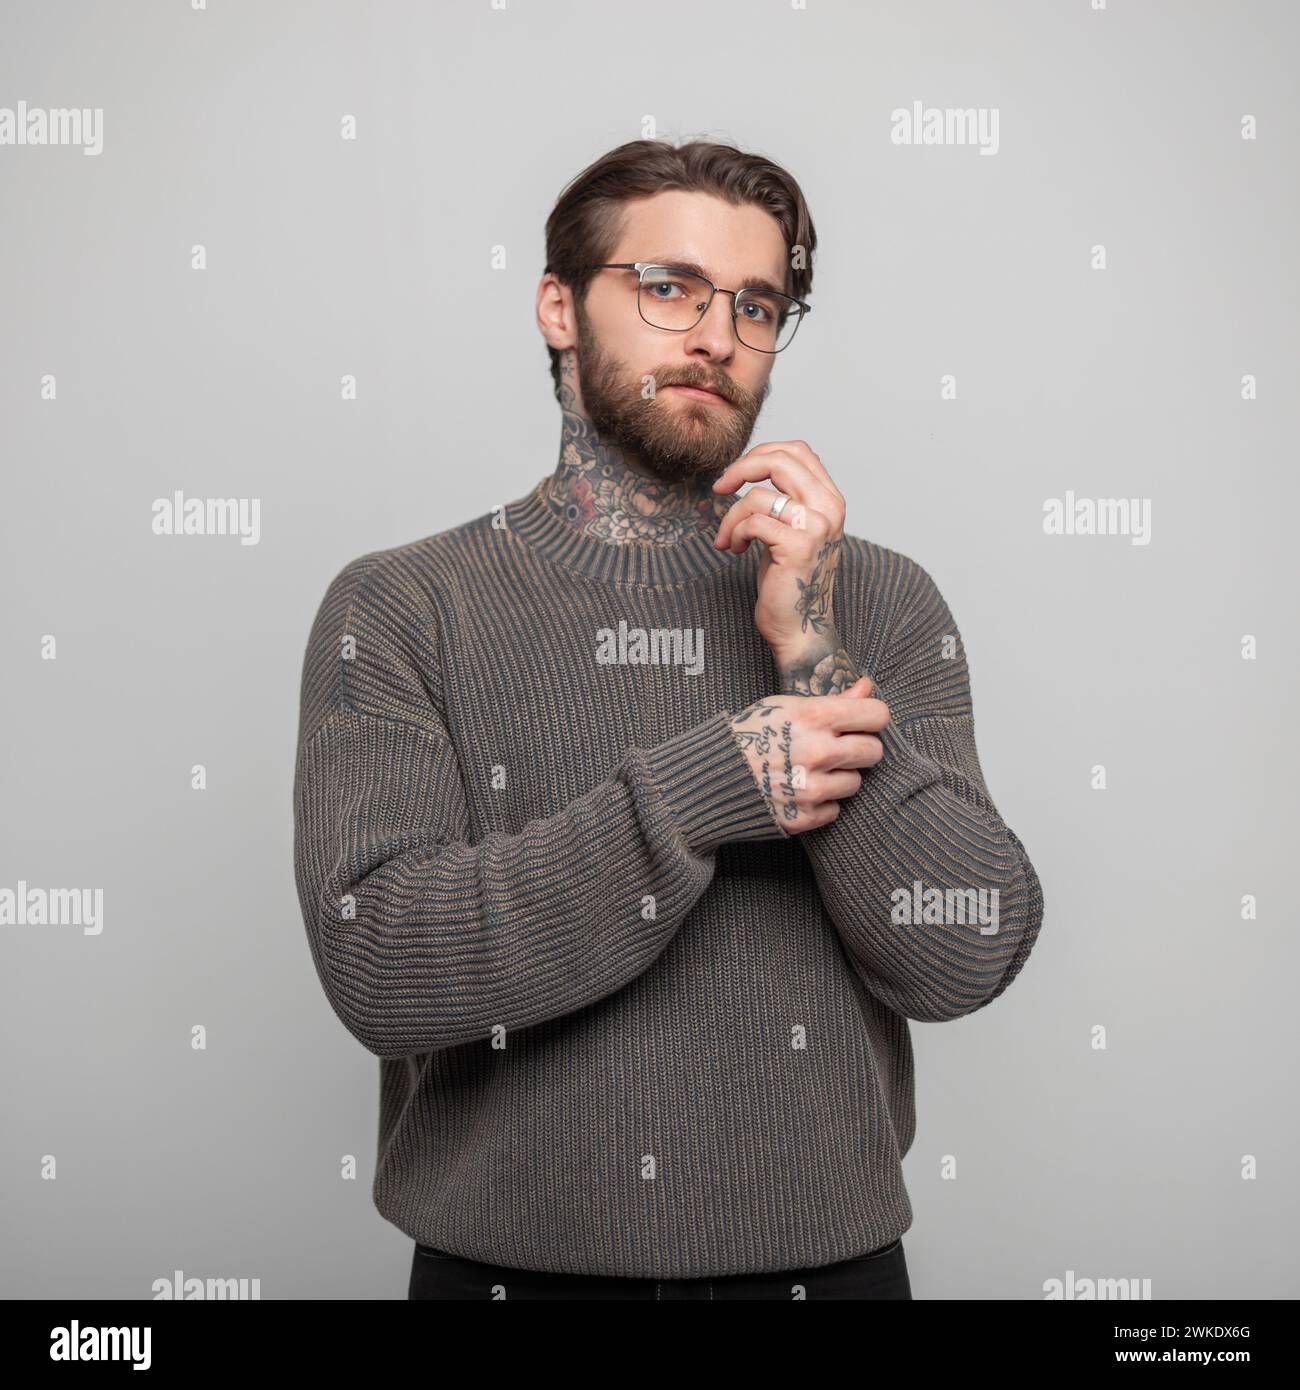 Beautiful Fashion Male Studio Portrait Of Handsome Business Man With Hairstyle And Tattoos With Sunglasses In Vintage Stylish Knitted Gray Sweater On Stock Photo